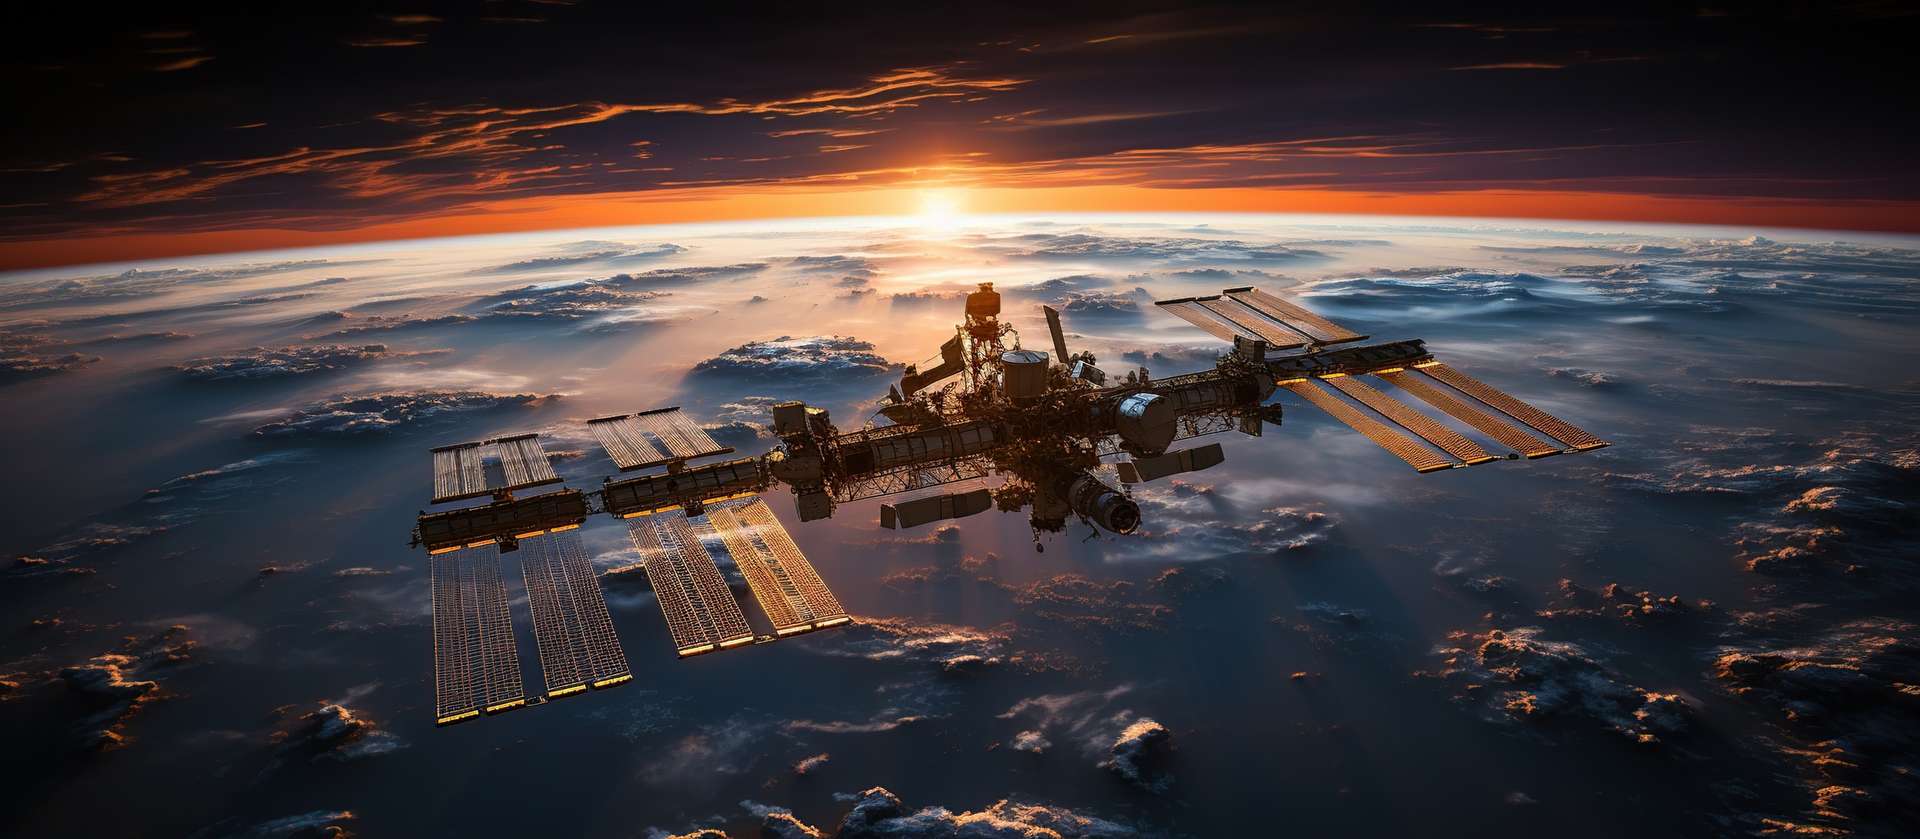 NASA is concerned about bacteria mutations aboard the space station that could spread to Earth